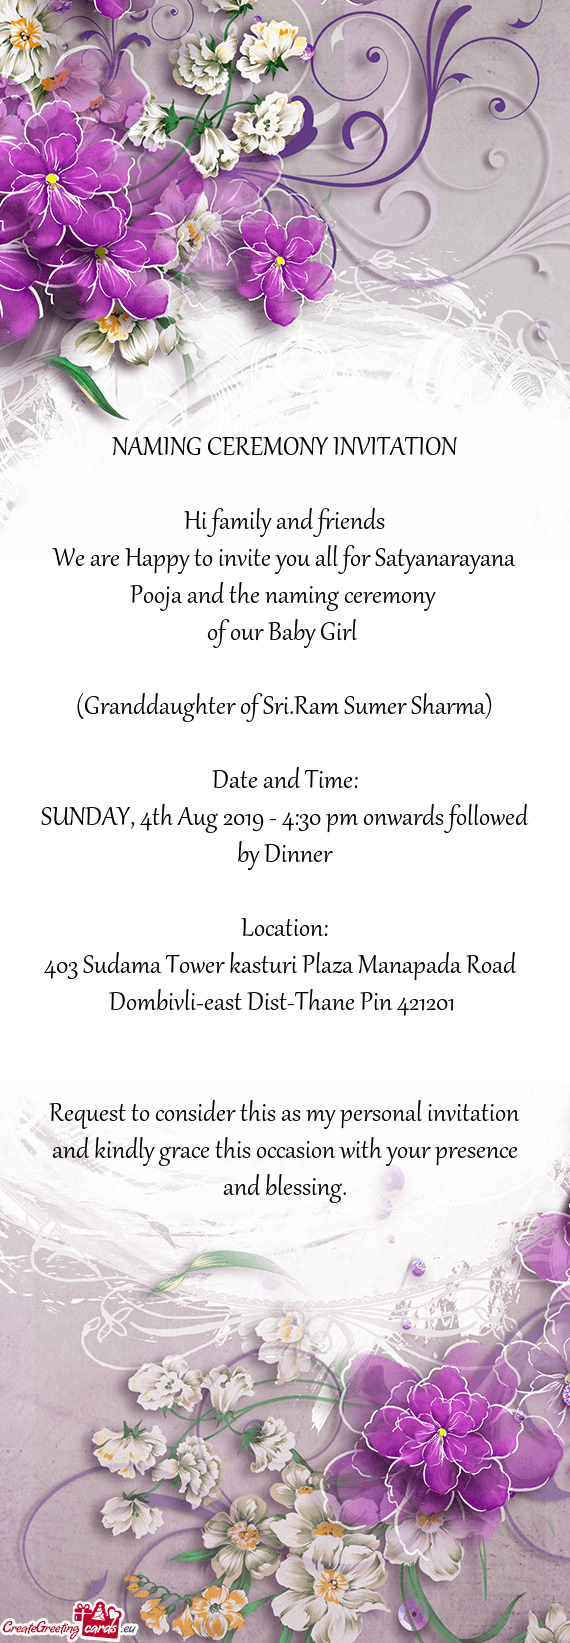 SUNDAY, 4th Aug 2019 - 4:30 pm onwards followed by Dinner